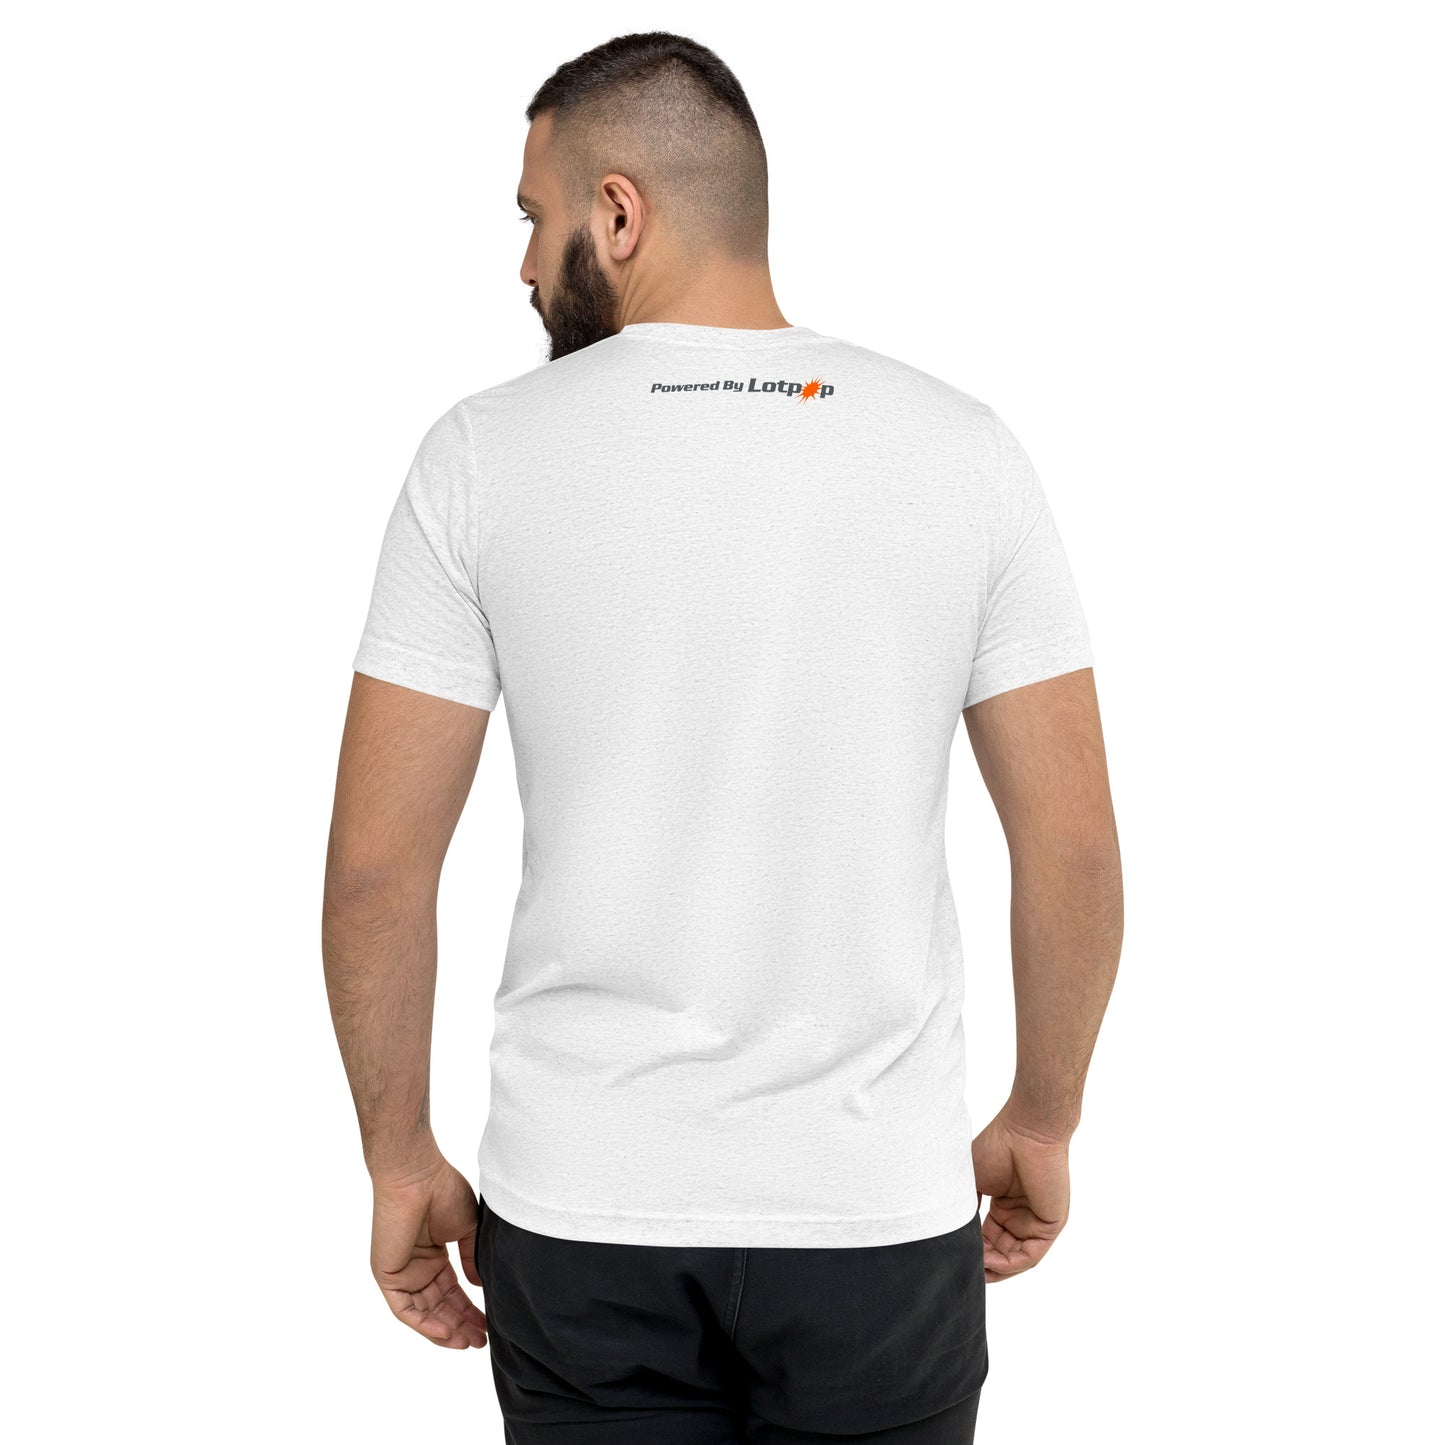 First On The Up Bus short sleeve t-shirt